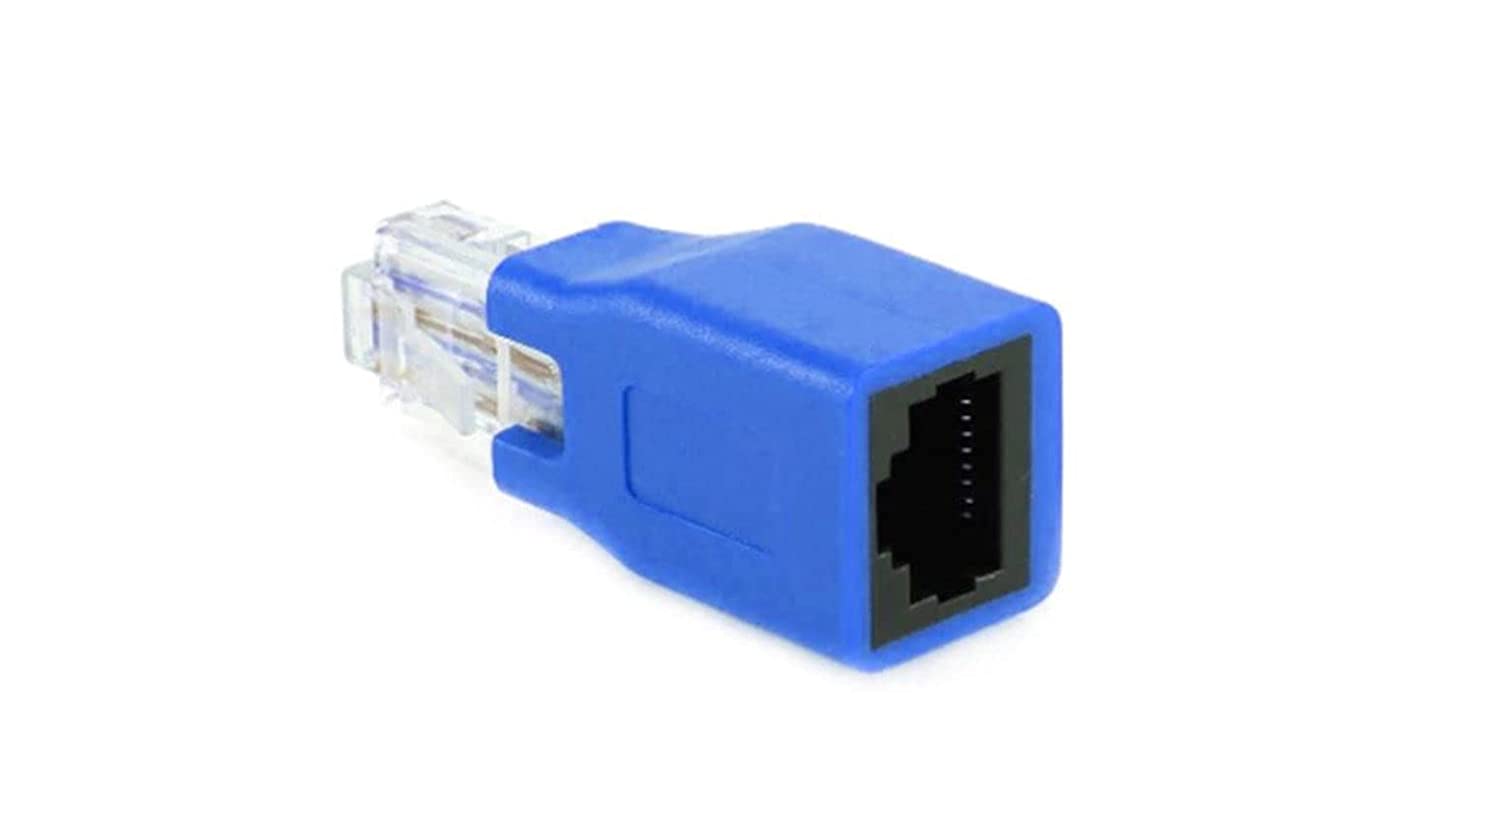 NIRVIG   RJ45 Crossover adapter for LAN / network connections /convert straight cable to crossover/crossover to Straight